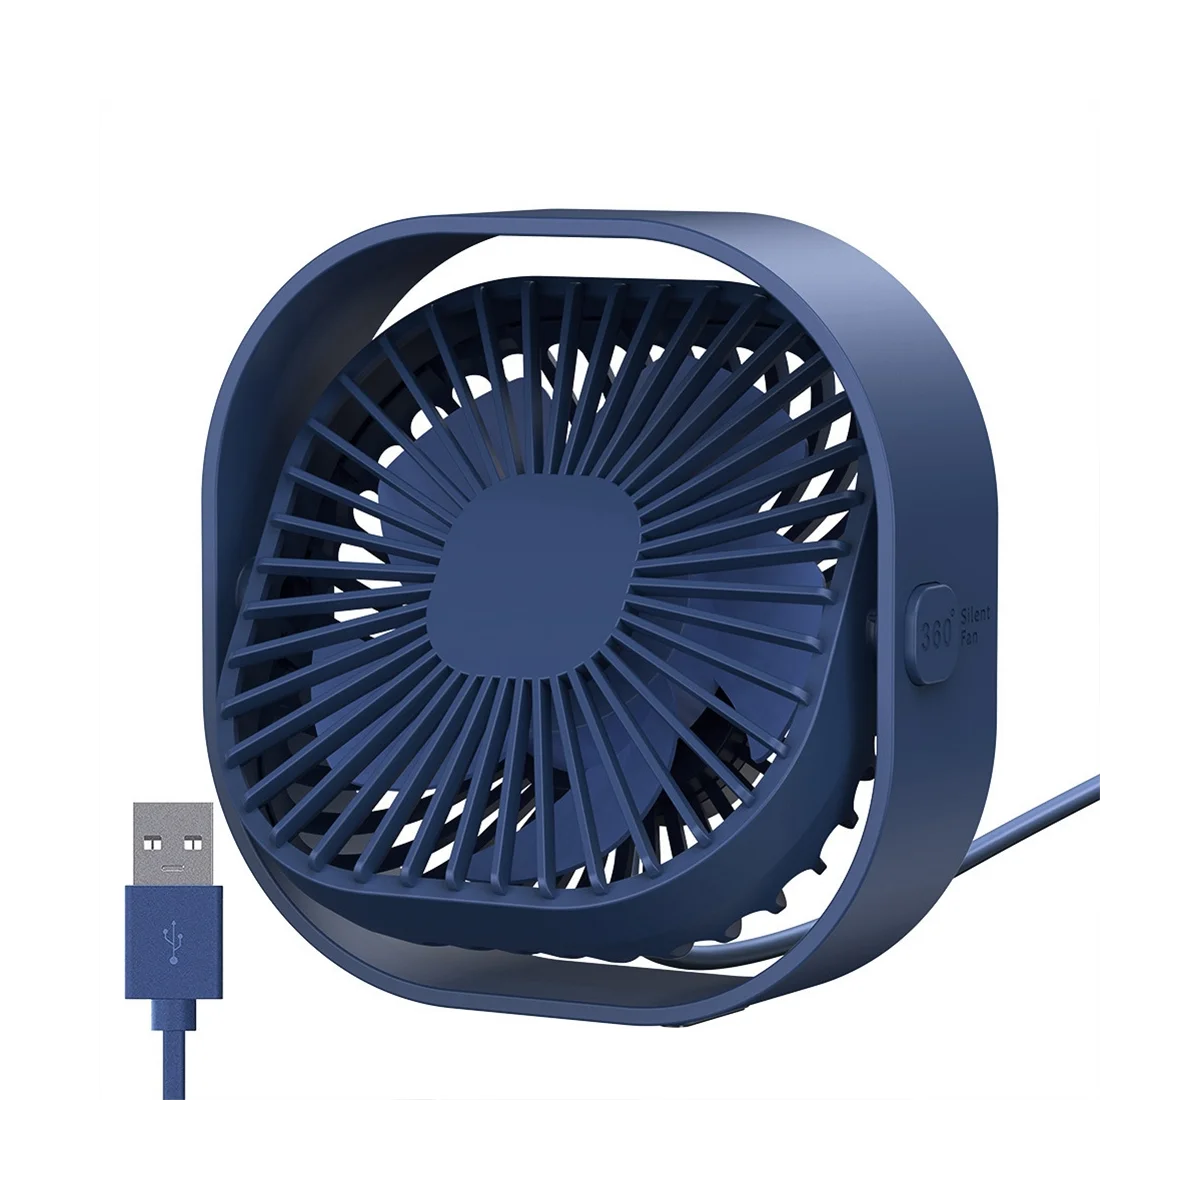 

USB Desk Fan Mini Fan with Quiet Operation, Three-Speed Wind, 360° Rotatable Headfor Home Office Bedroom Table (Blue)